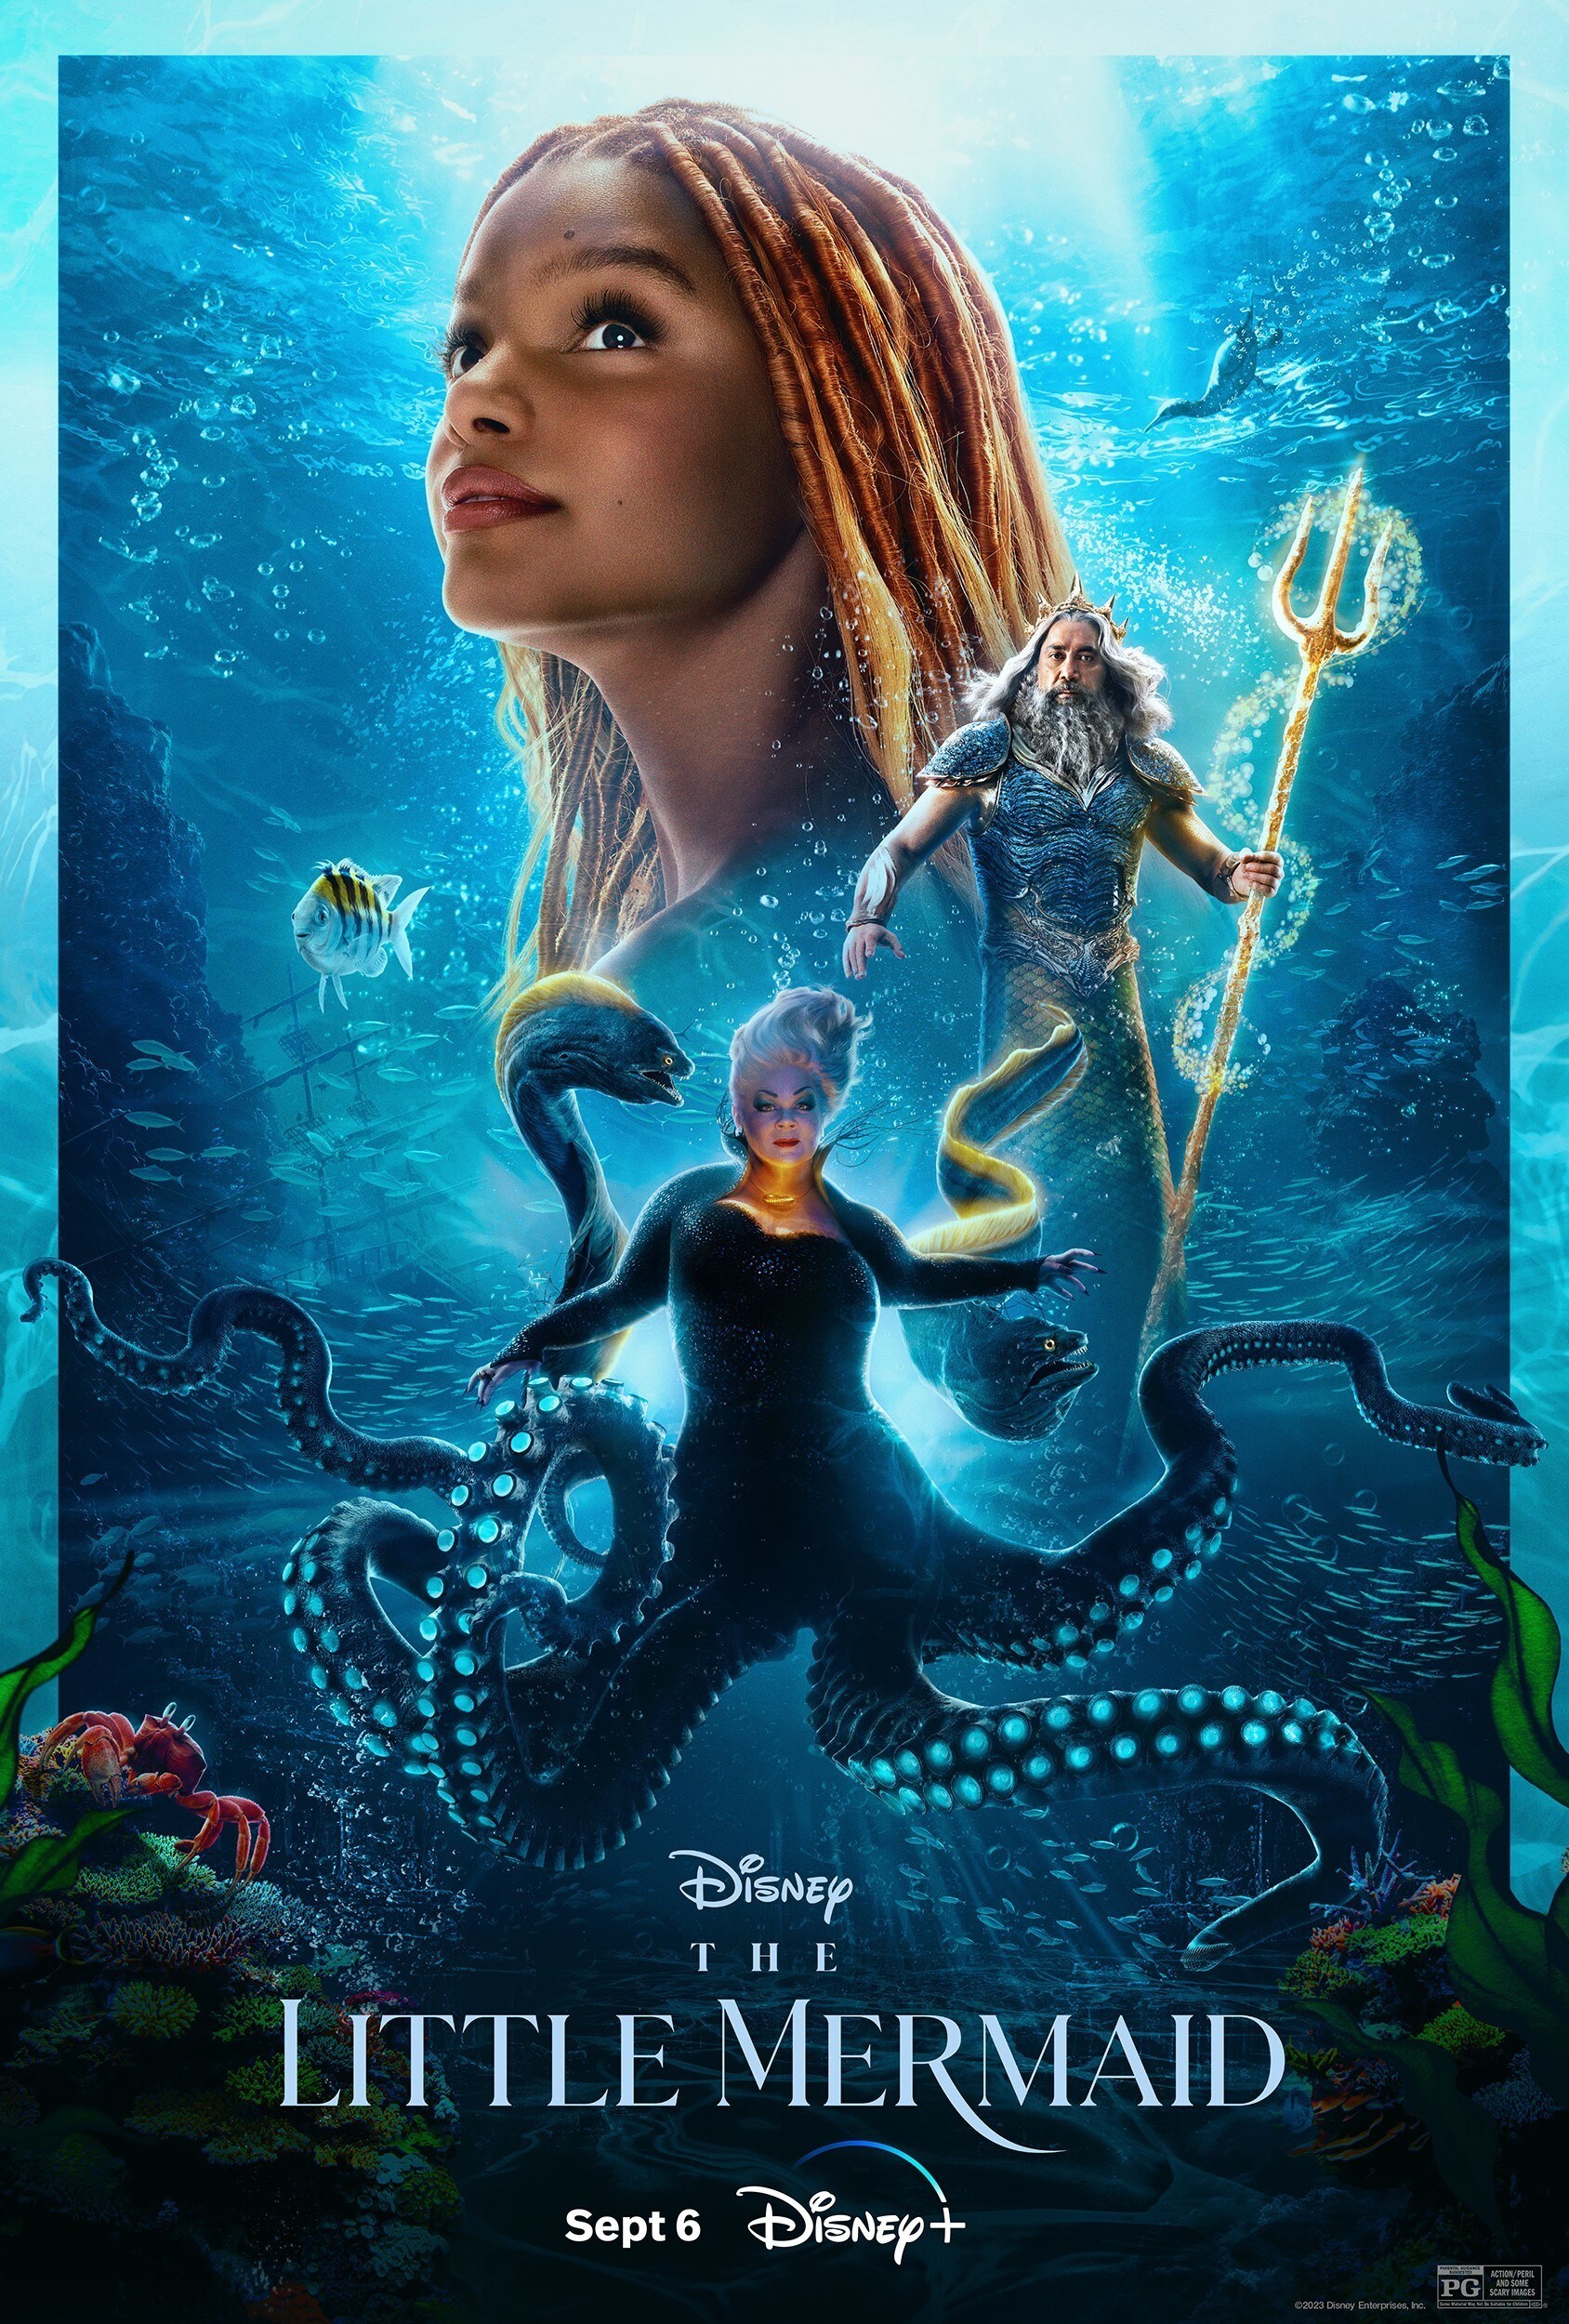 Disney’s LiveAction Reimagining Of “The Little Mermaid” To Debut On